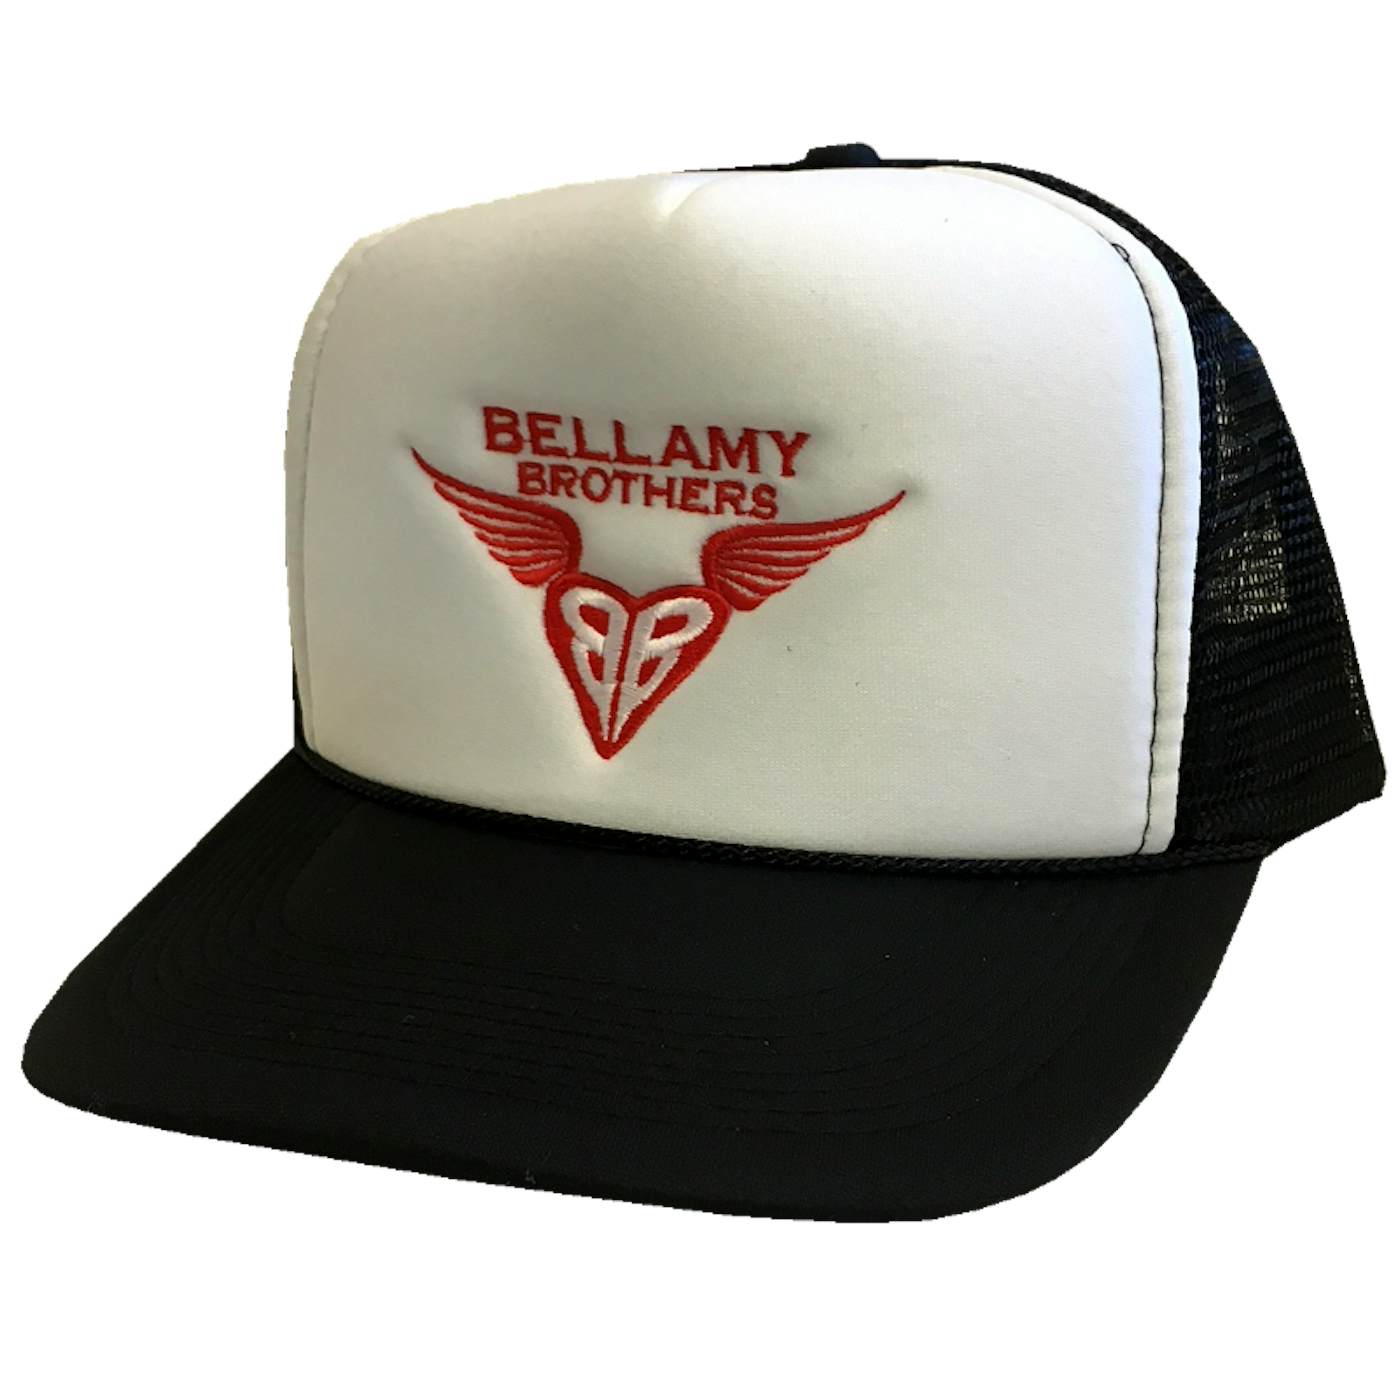 The Bellamy Brothers White and Black Trucker Hat